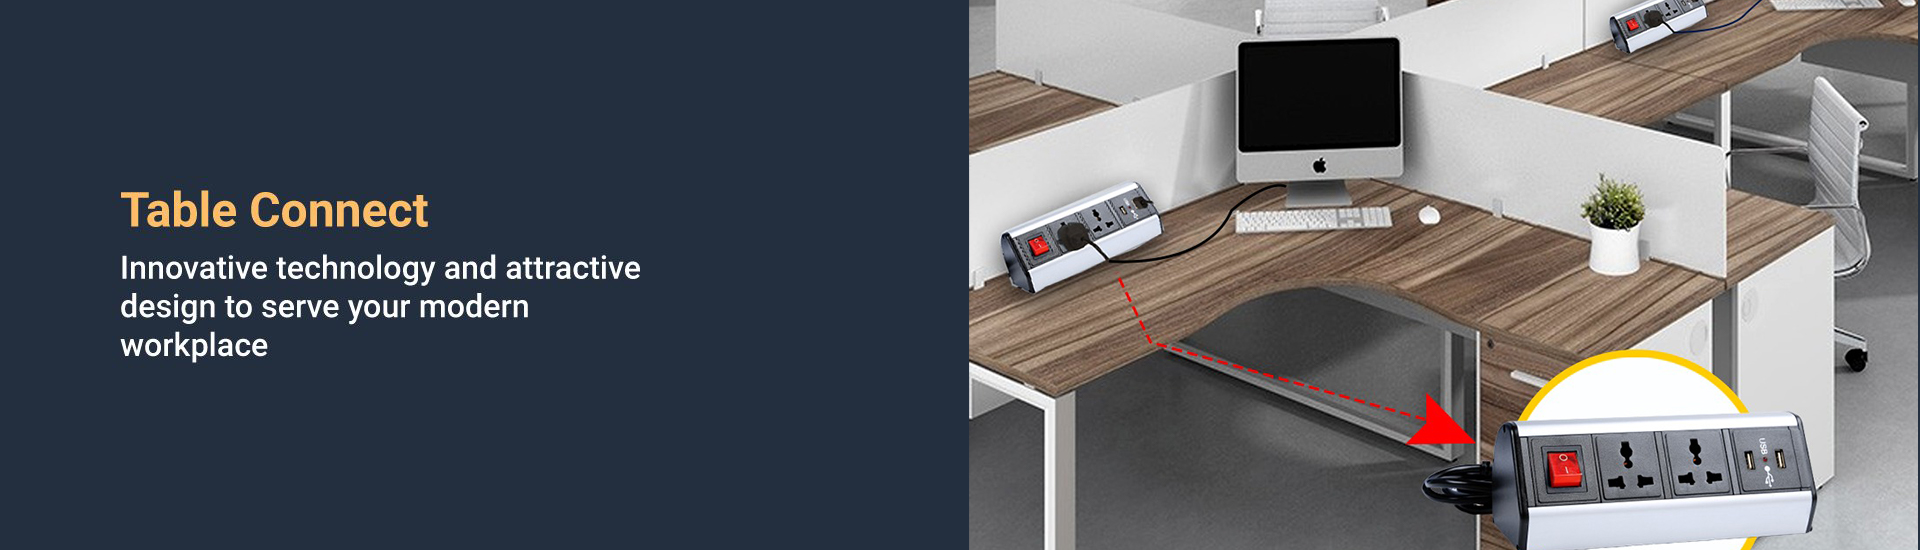 table connect incline